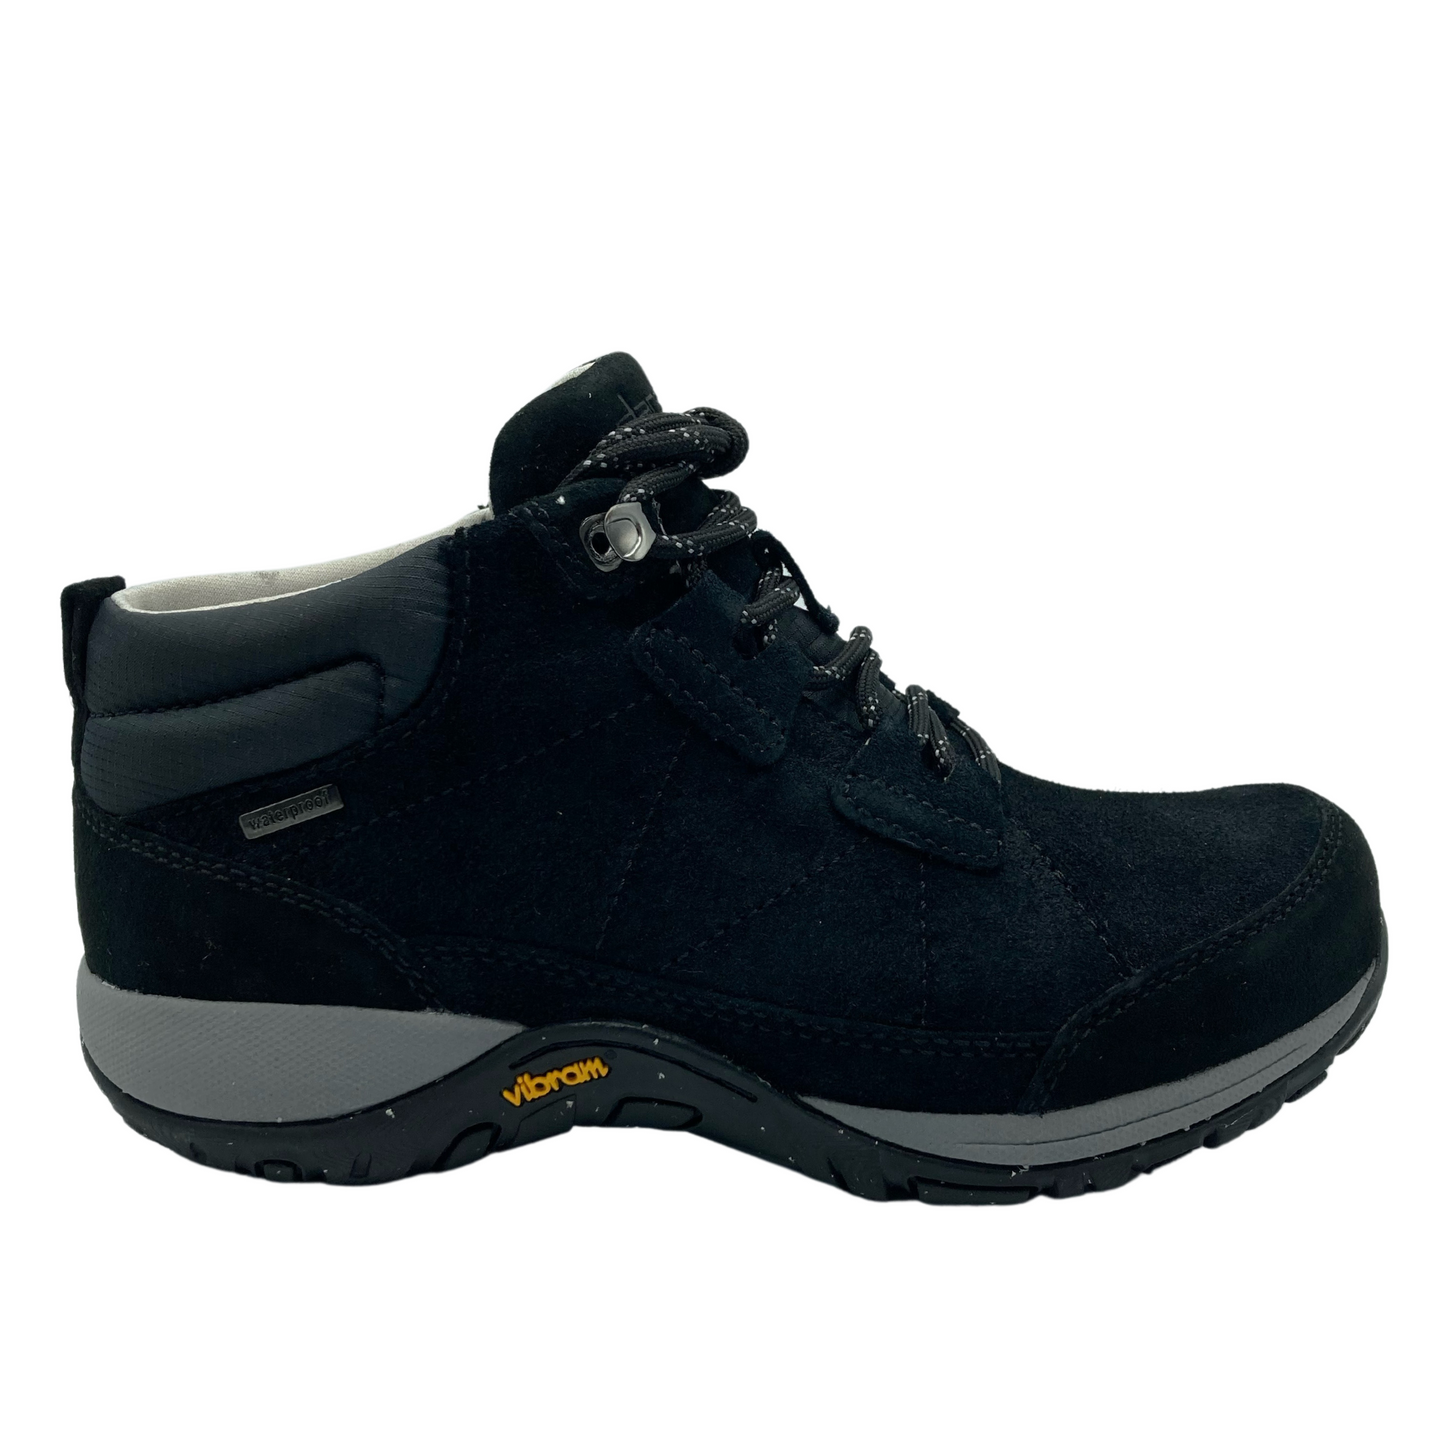 Right facing view of black suede short walking boot